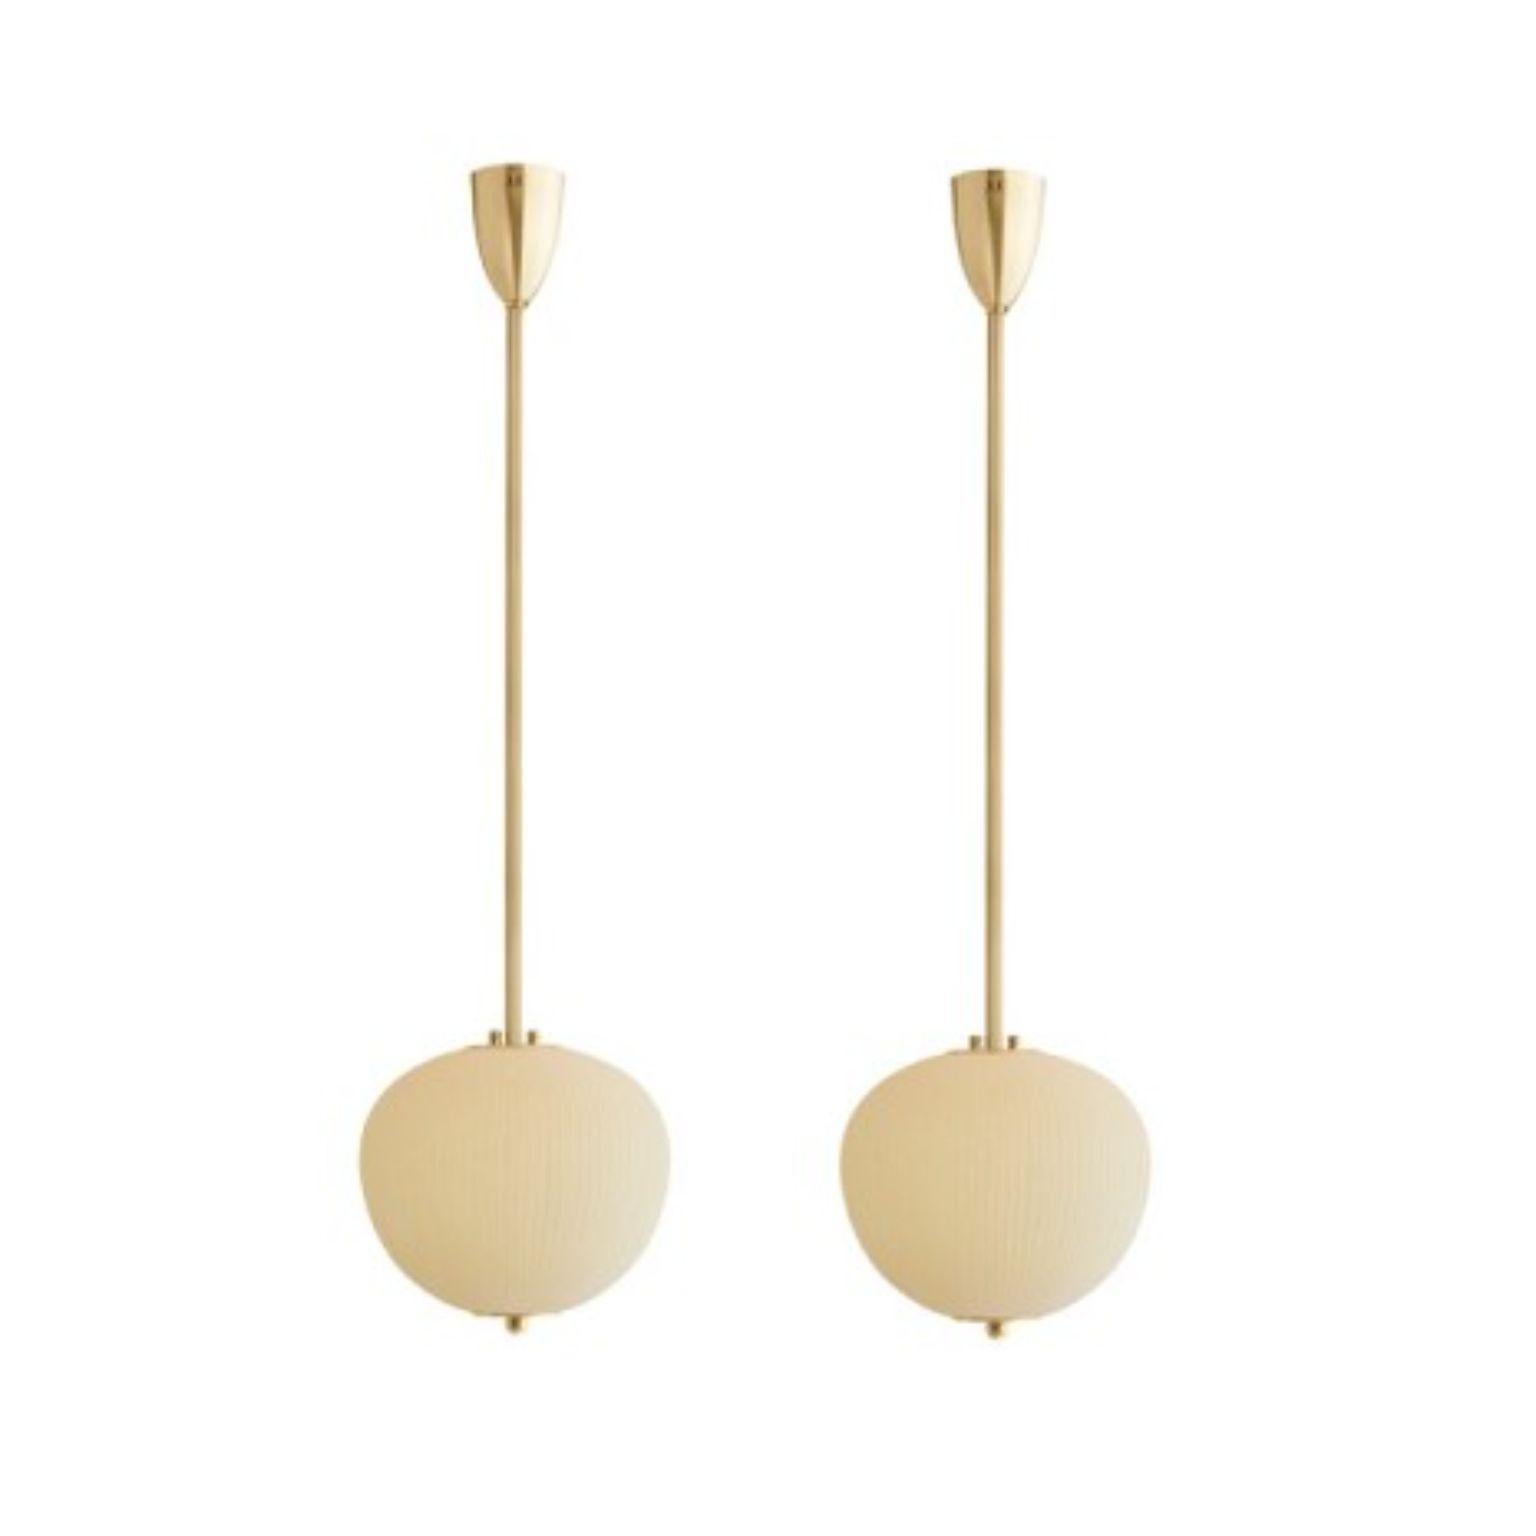 Pendant China 03 by Magic Circus Editions.
Dimensions: H 90 x W 26.2 x D 26.2 cm, also available in H 110, 130, 150, 175, 190.
Materials: brass, mouth blown glass sculpted with a diamond saw.
Colour: Mustard yellow.

Available finishes: brass,